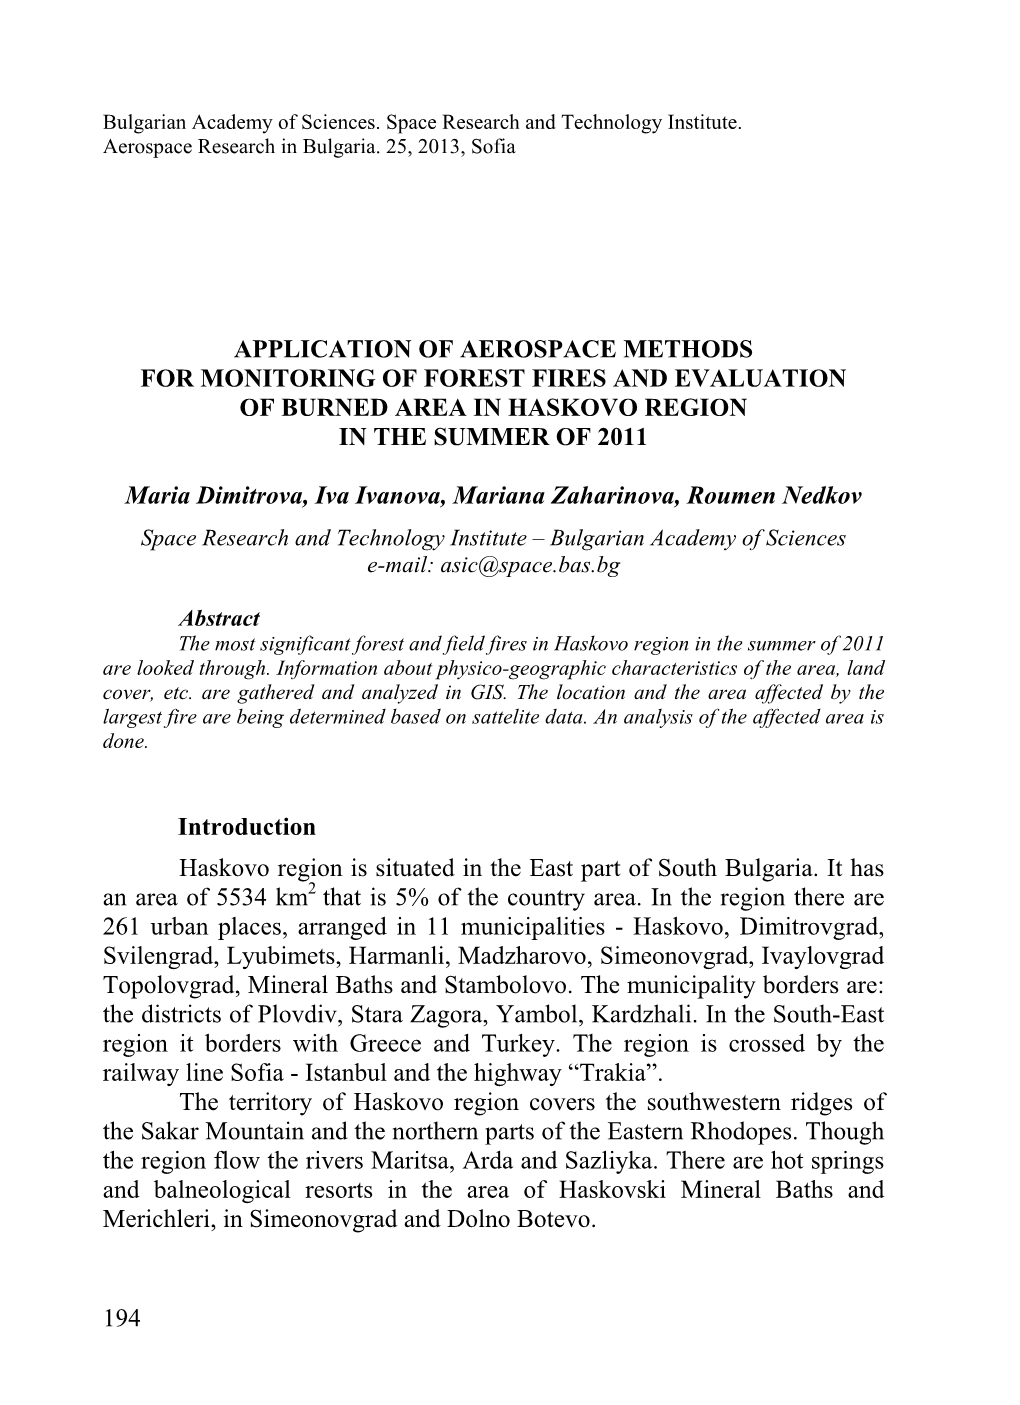 Application of Aerospace Methods for Monitoring of Forest Fires and Evaluation of Burned Area in Haskovo Region in the Summer of 2011